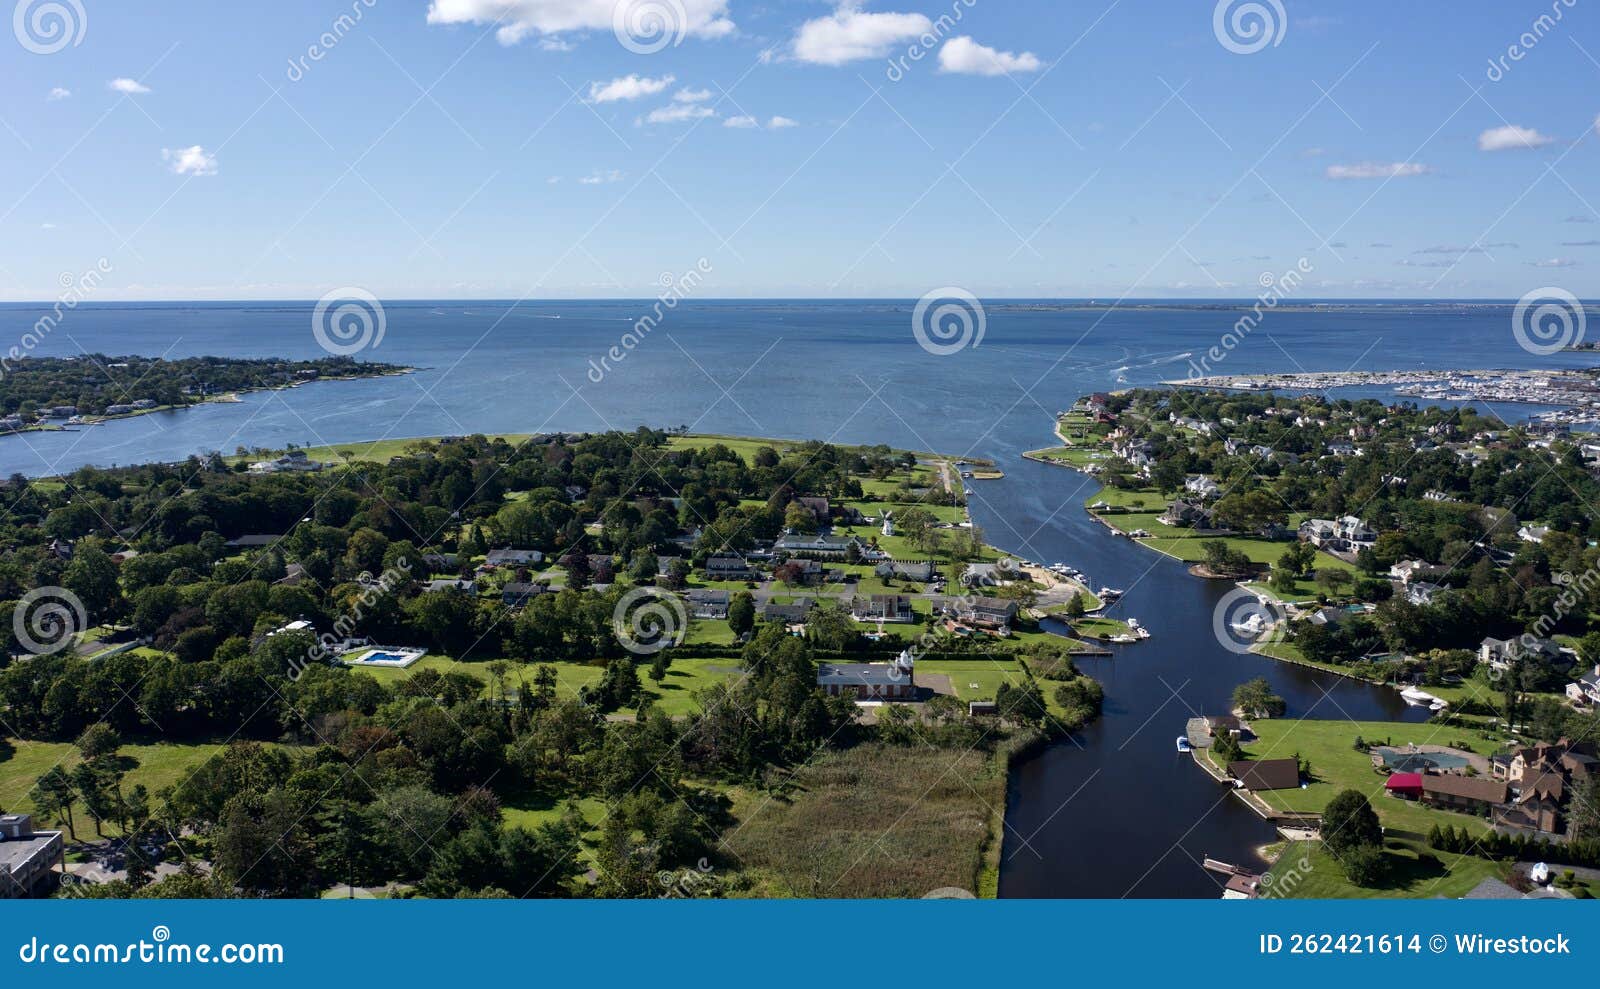 aerial landscape shot over bay shore, long island, new york, the us on a sunny day